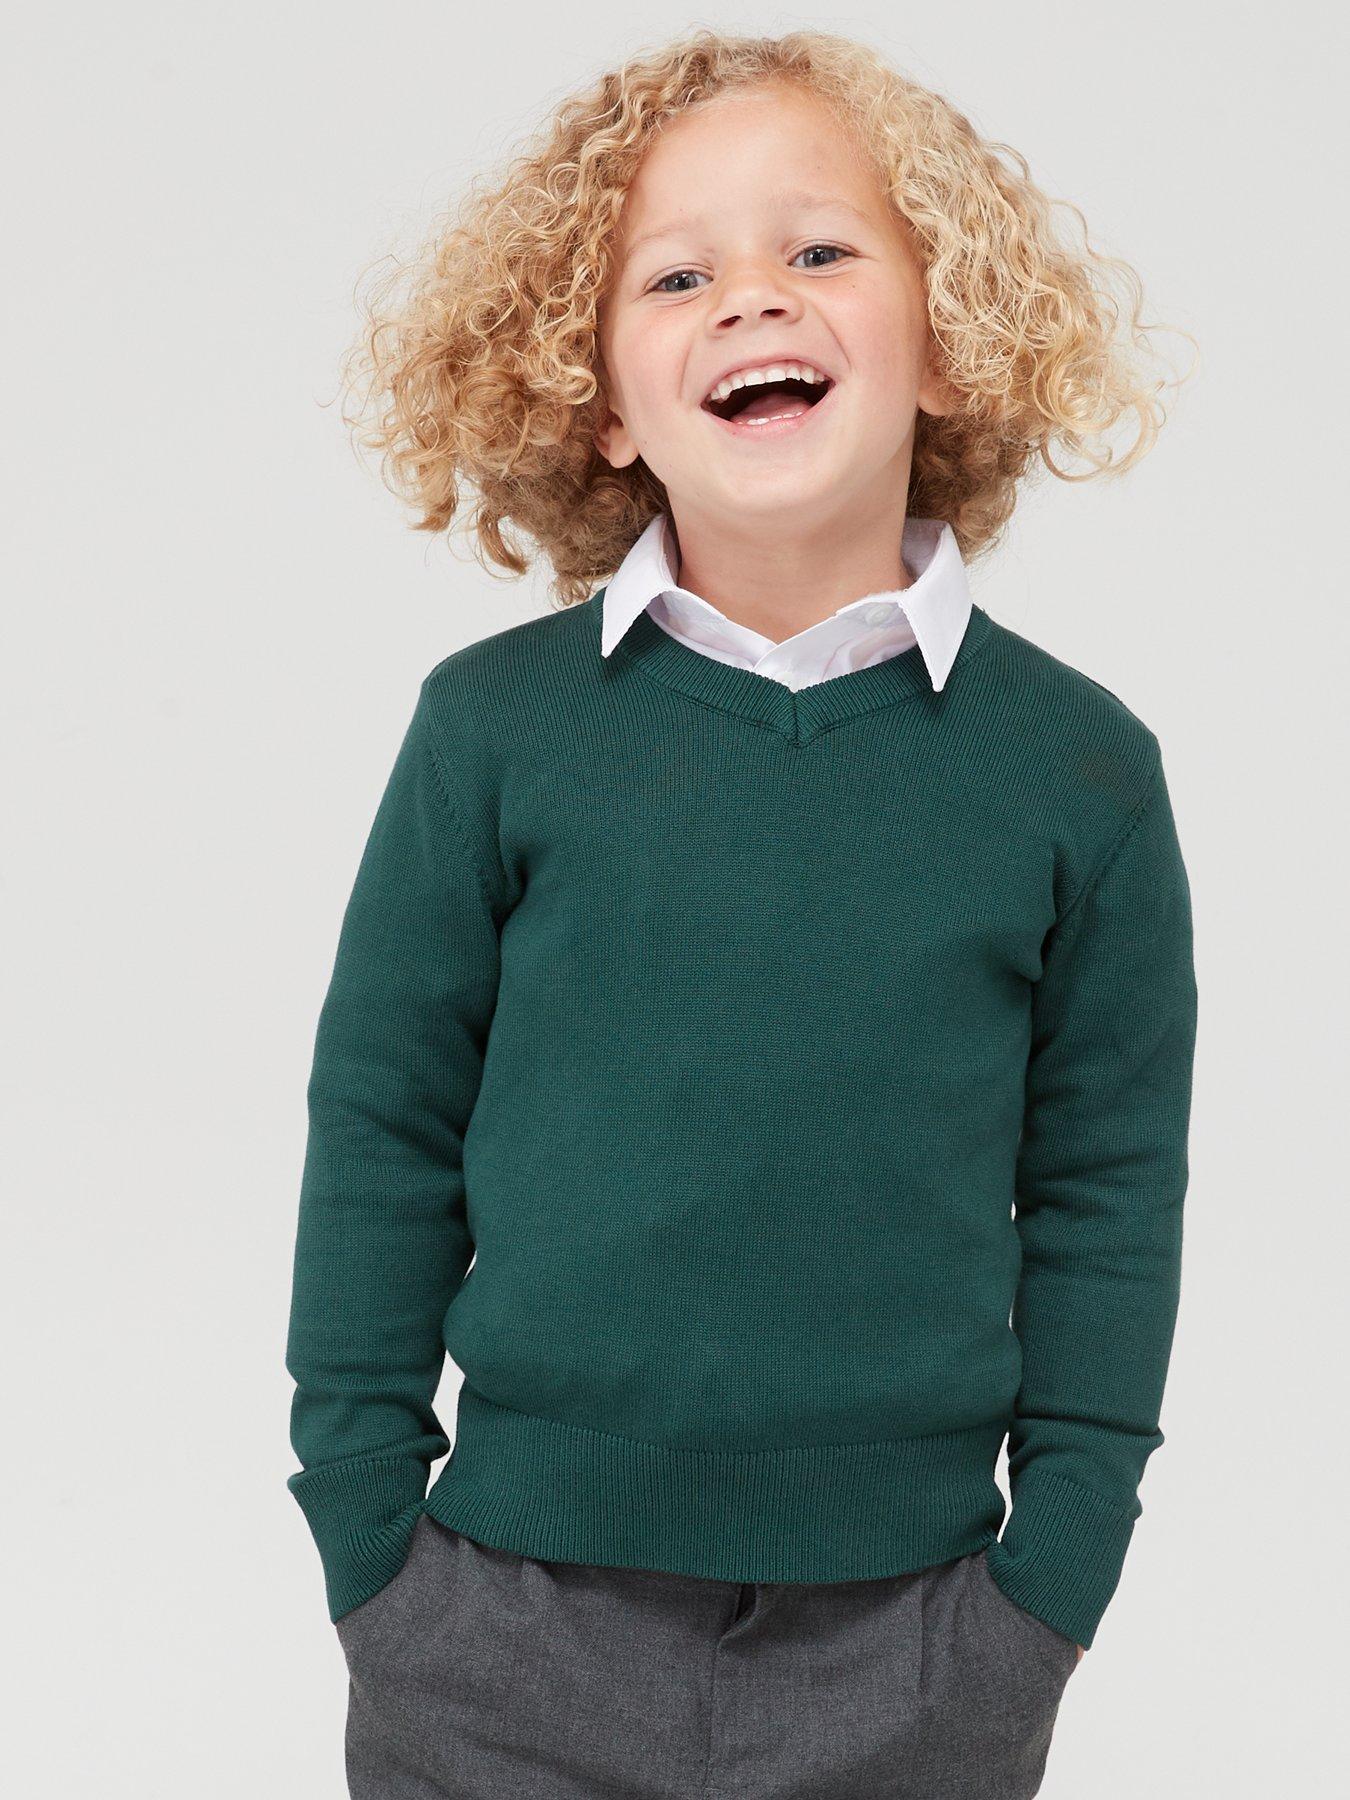 Everyday Unisex 2 Pack V-Neck School Jumpers - Green | very.co.uk